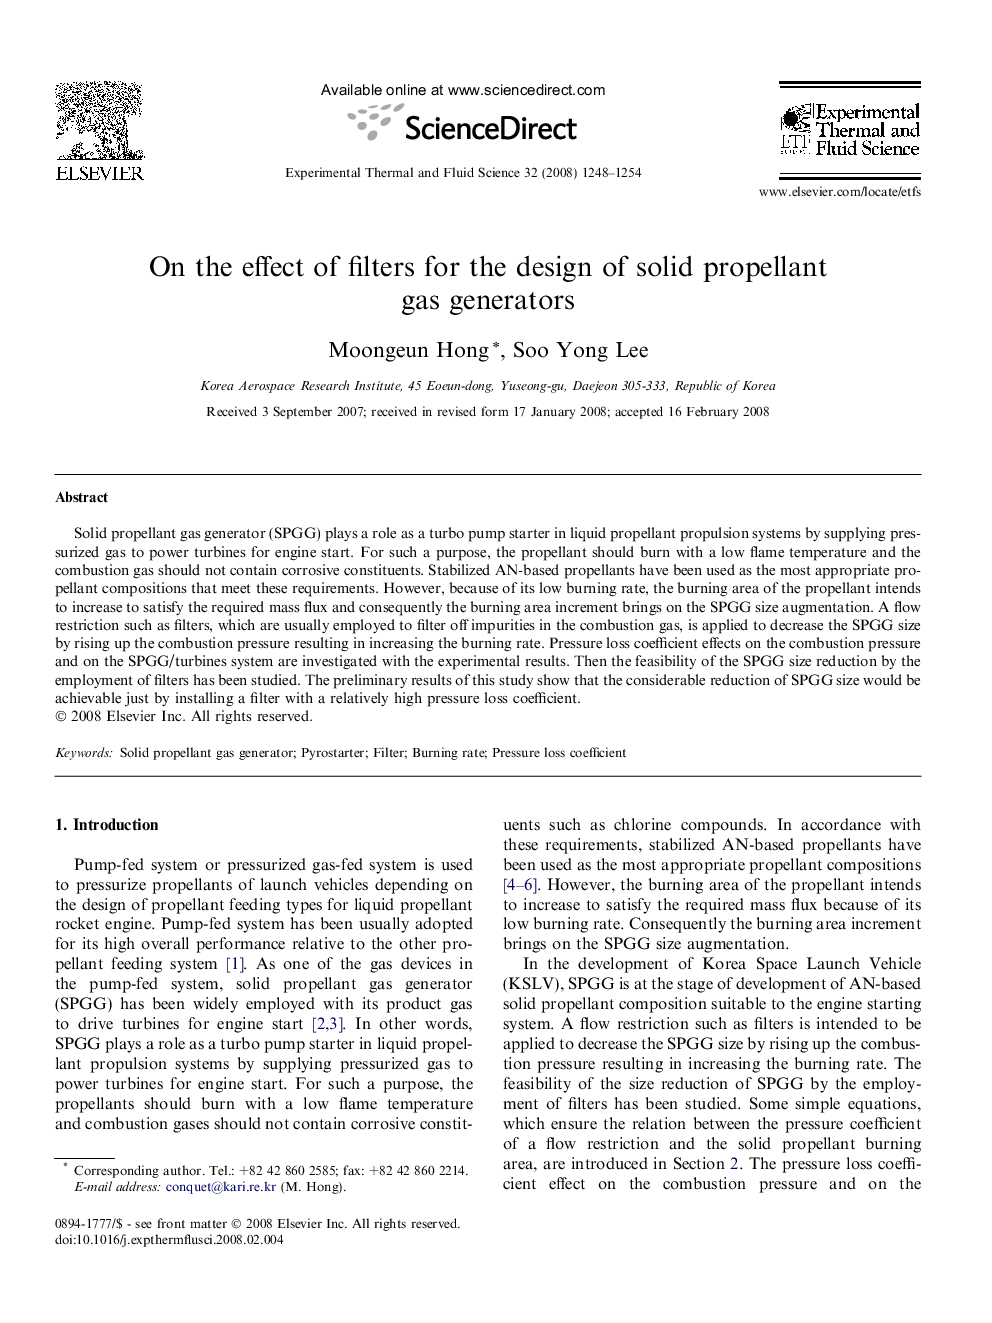 On the effect of filters for the design of solid propellant gas generators